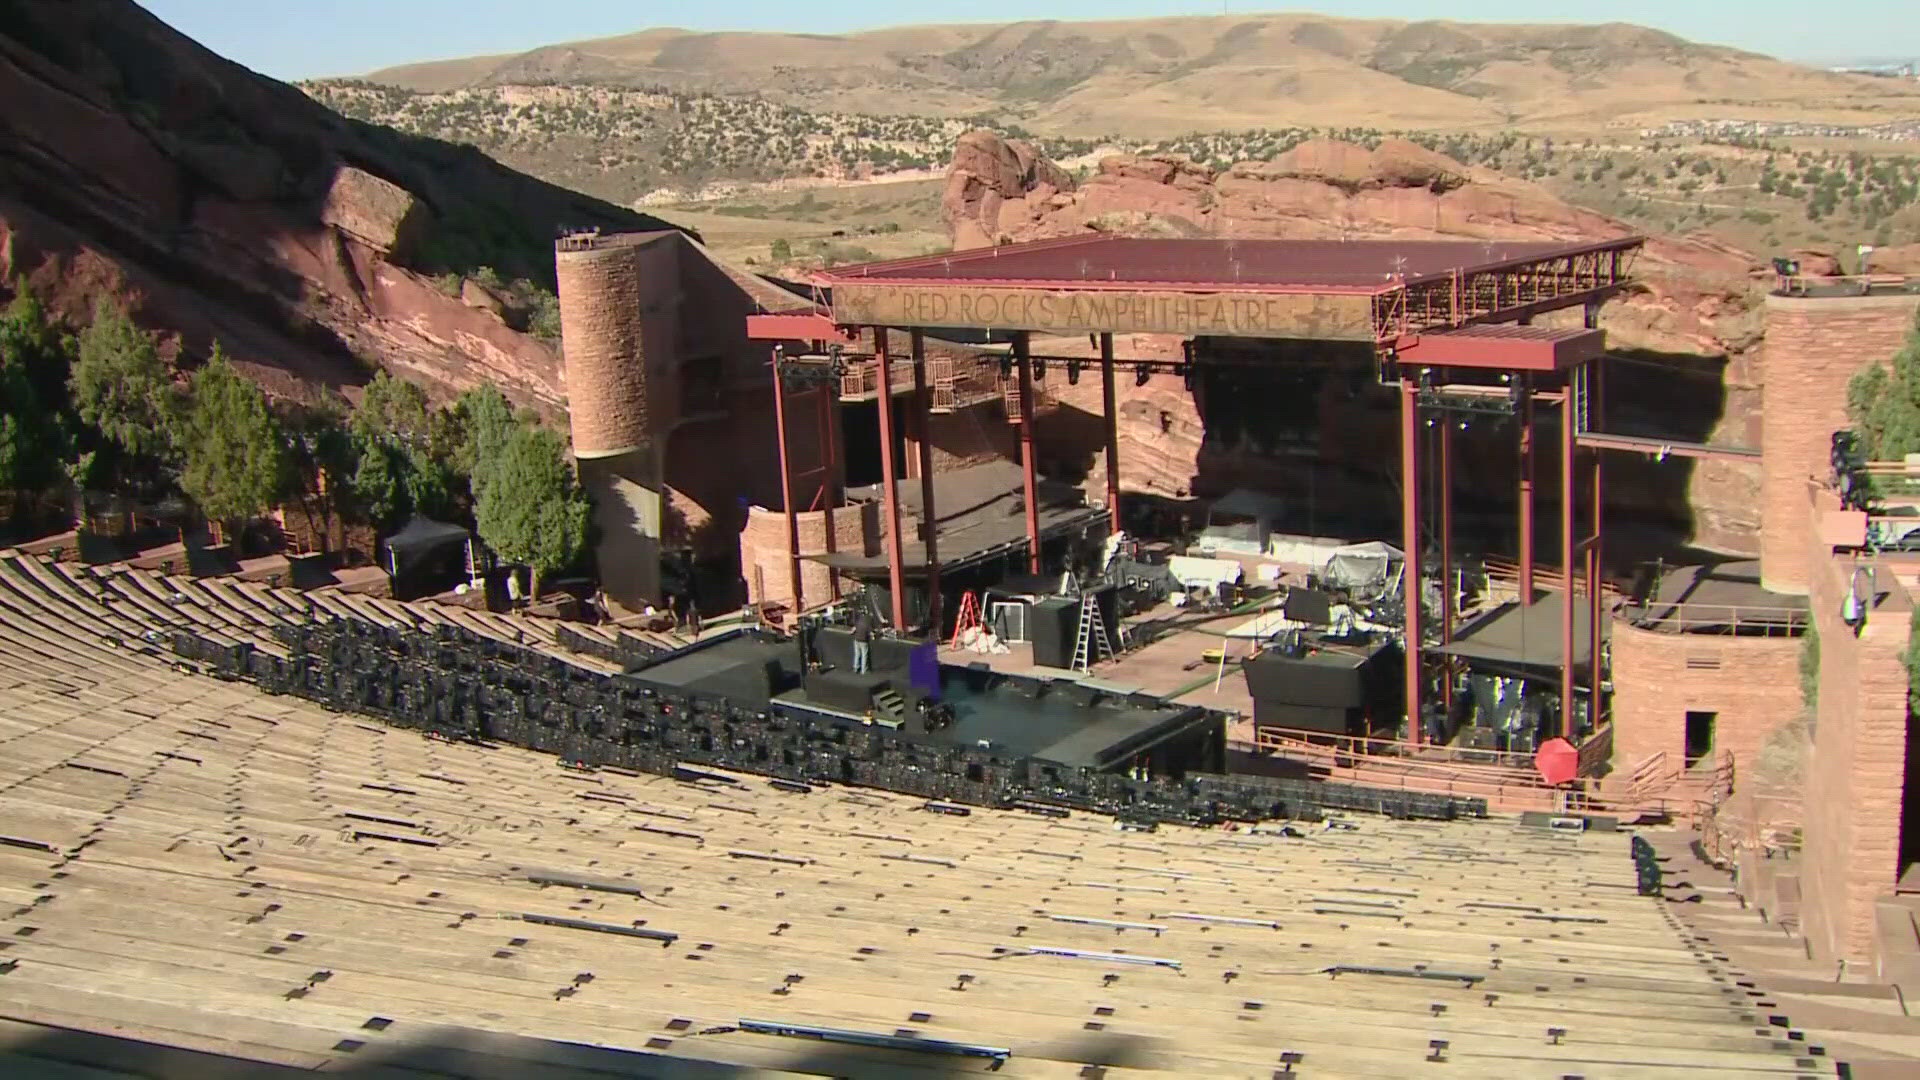 Monday night's concert with Hippo Campus at Red Rocks Amphitheatre is canceled due to forecasted high winds in the area.